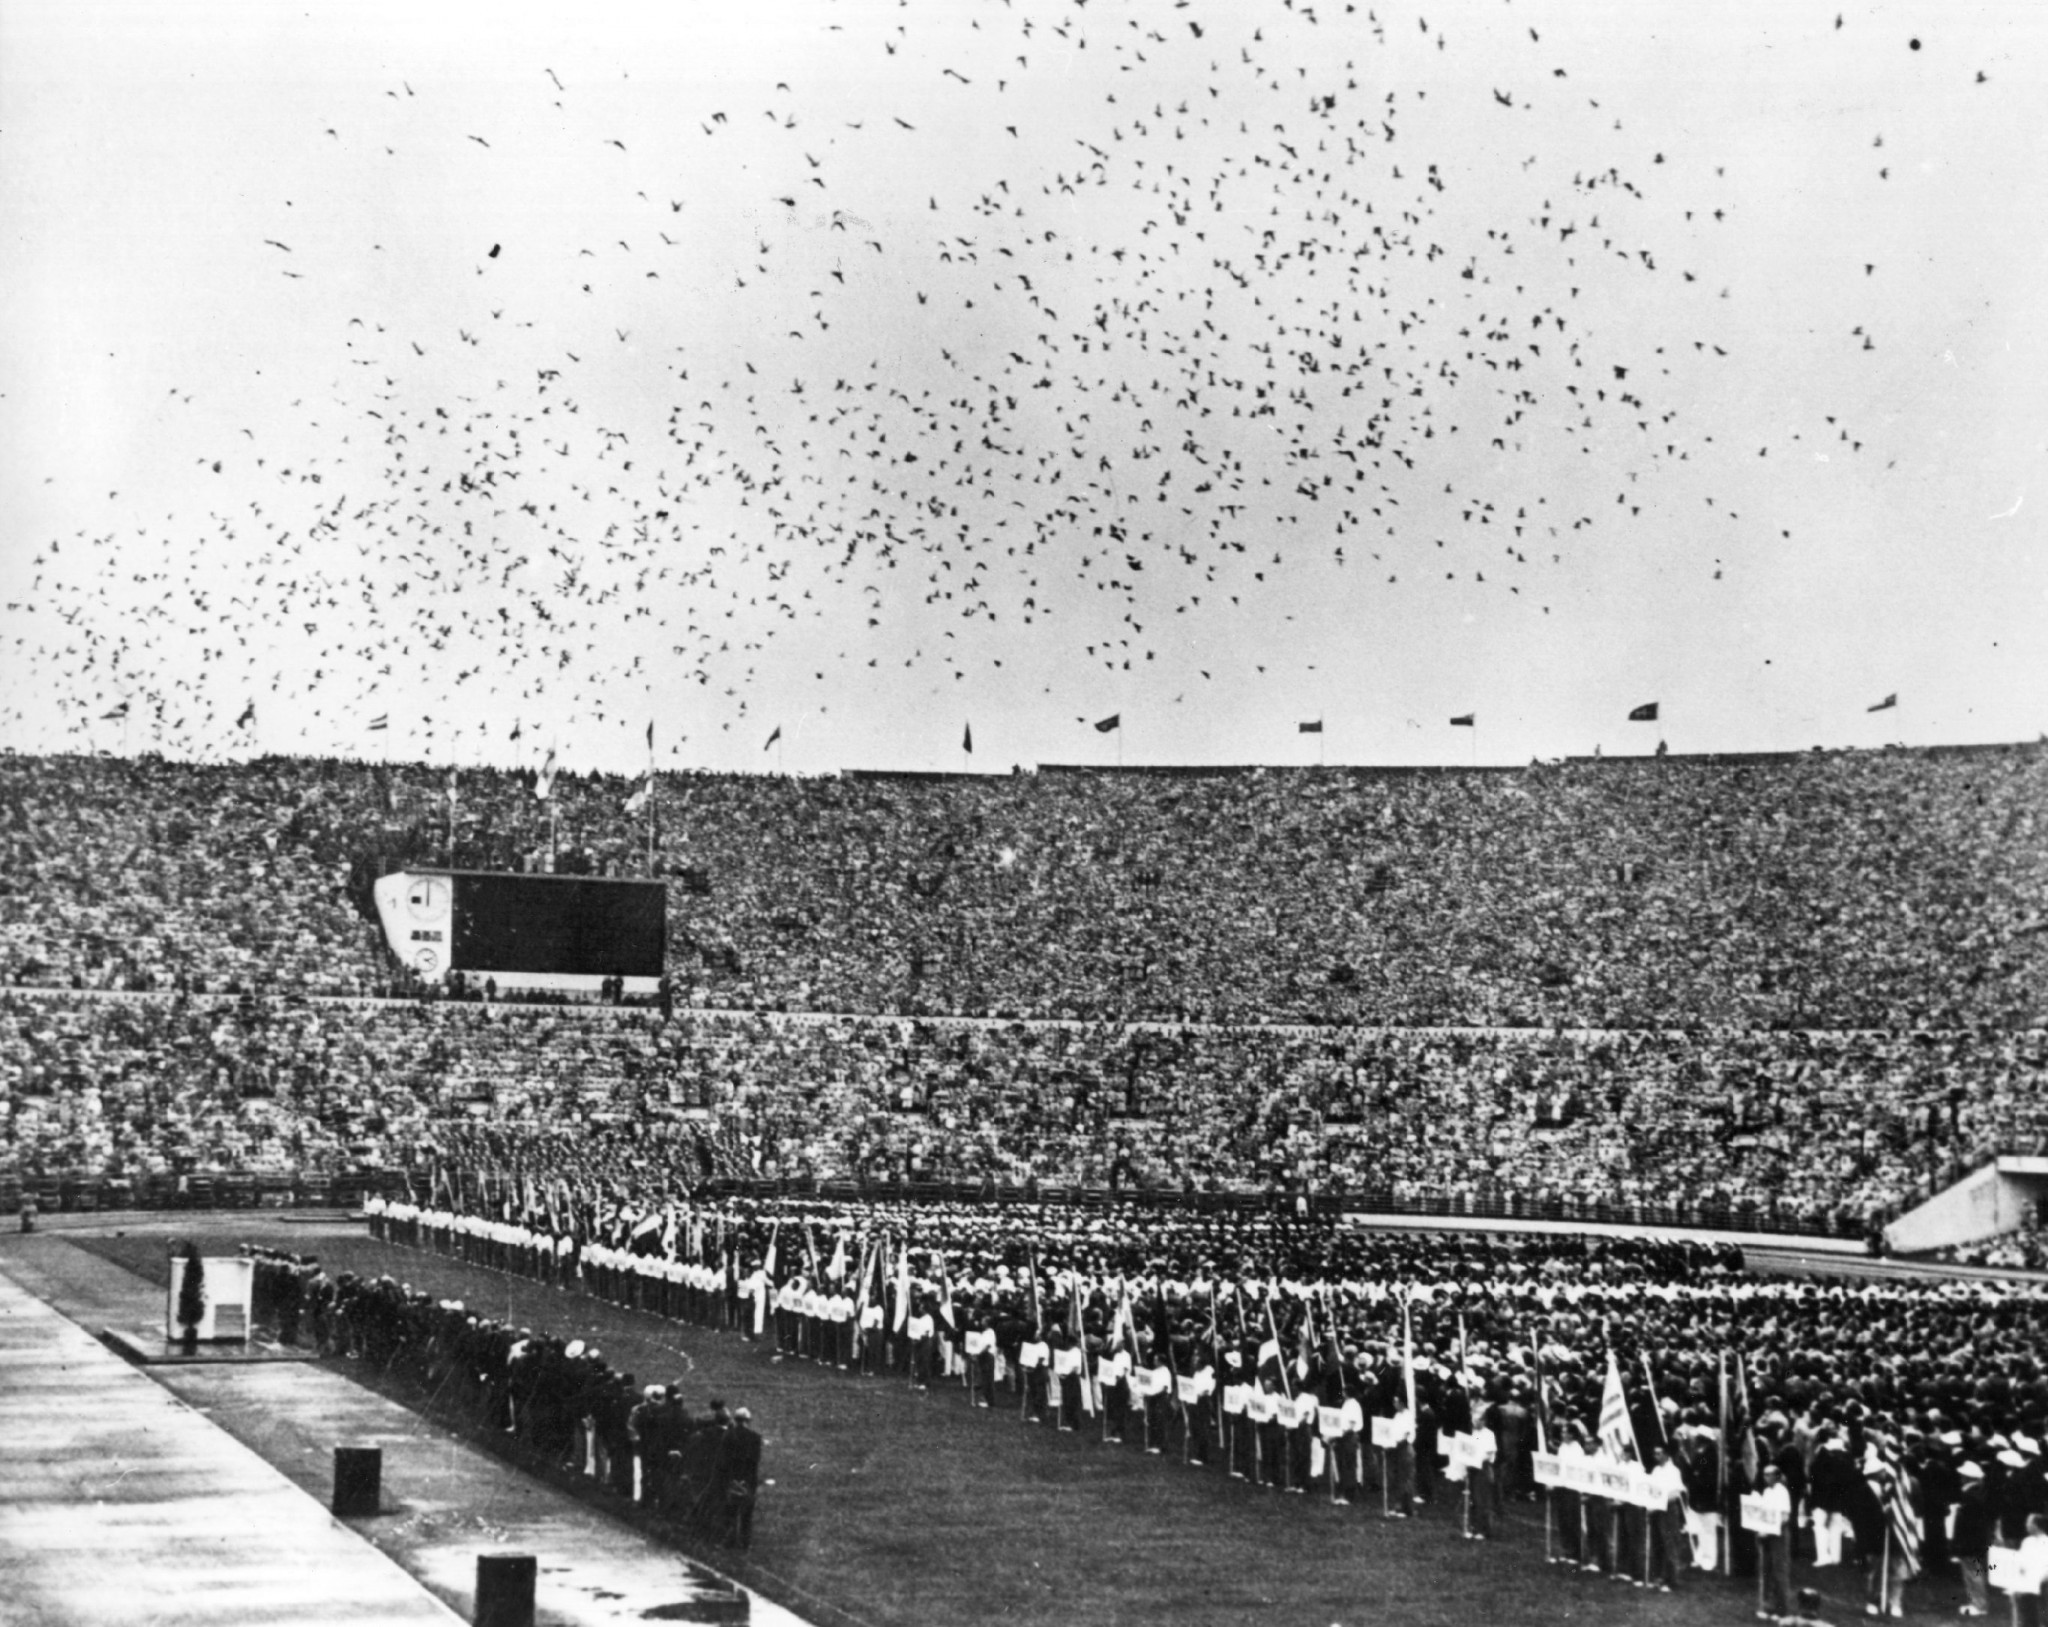 The Olympic Stadium in Helsinki finally hosted the Games in 1952 ©Getty Images